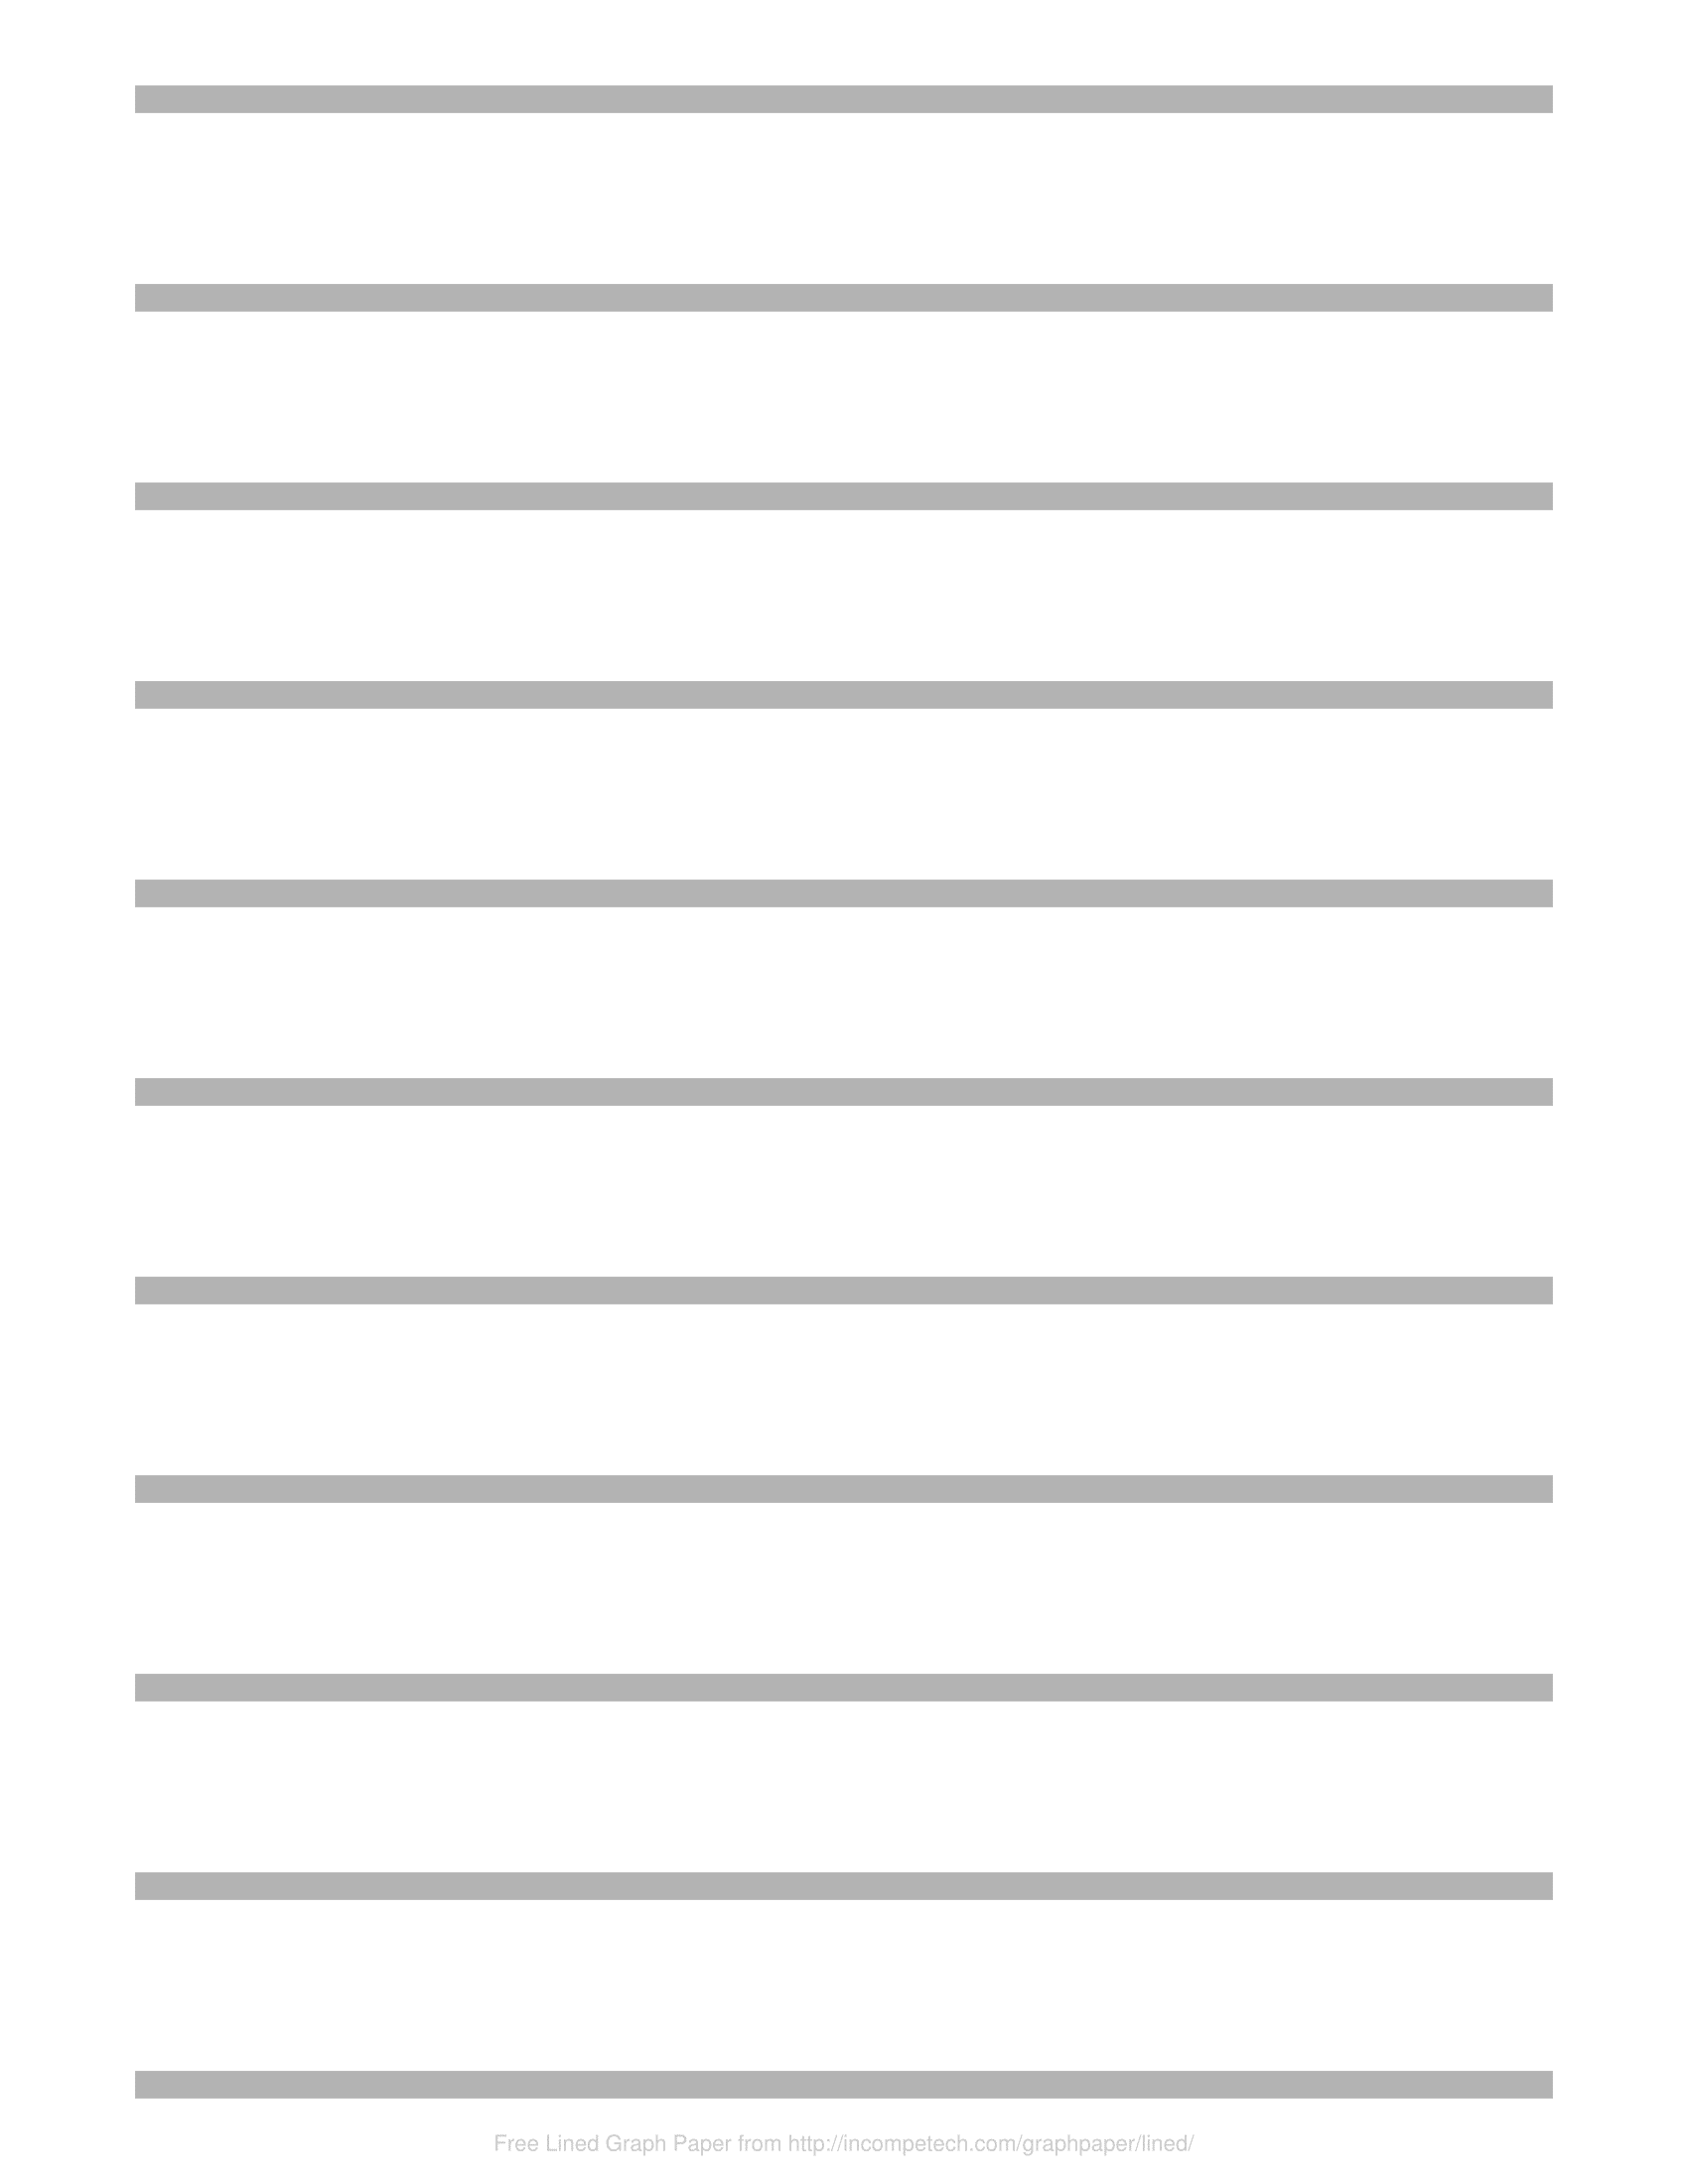 Free Online Graph Paper / Lined